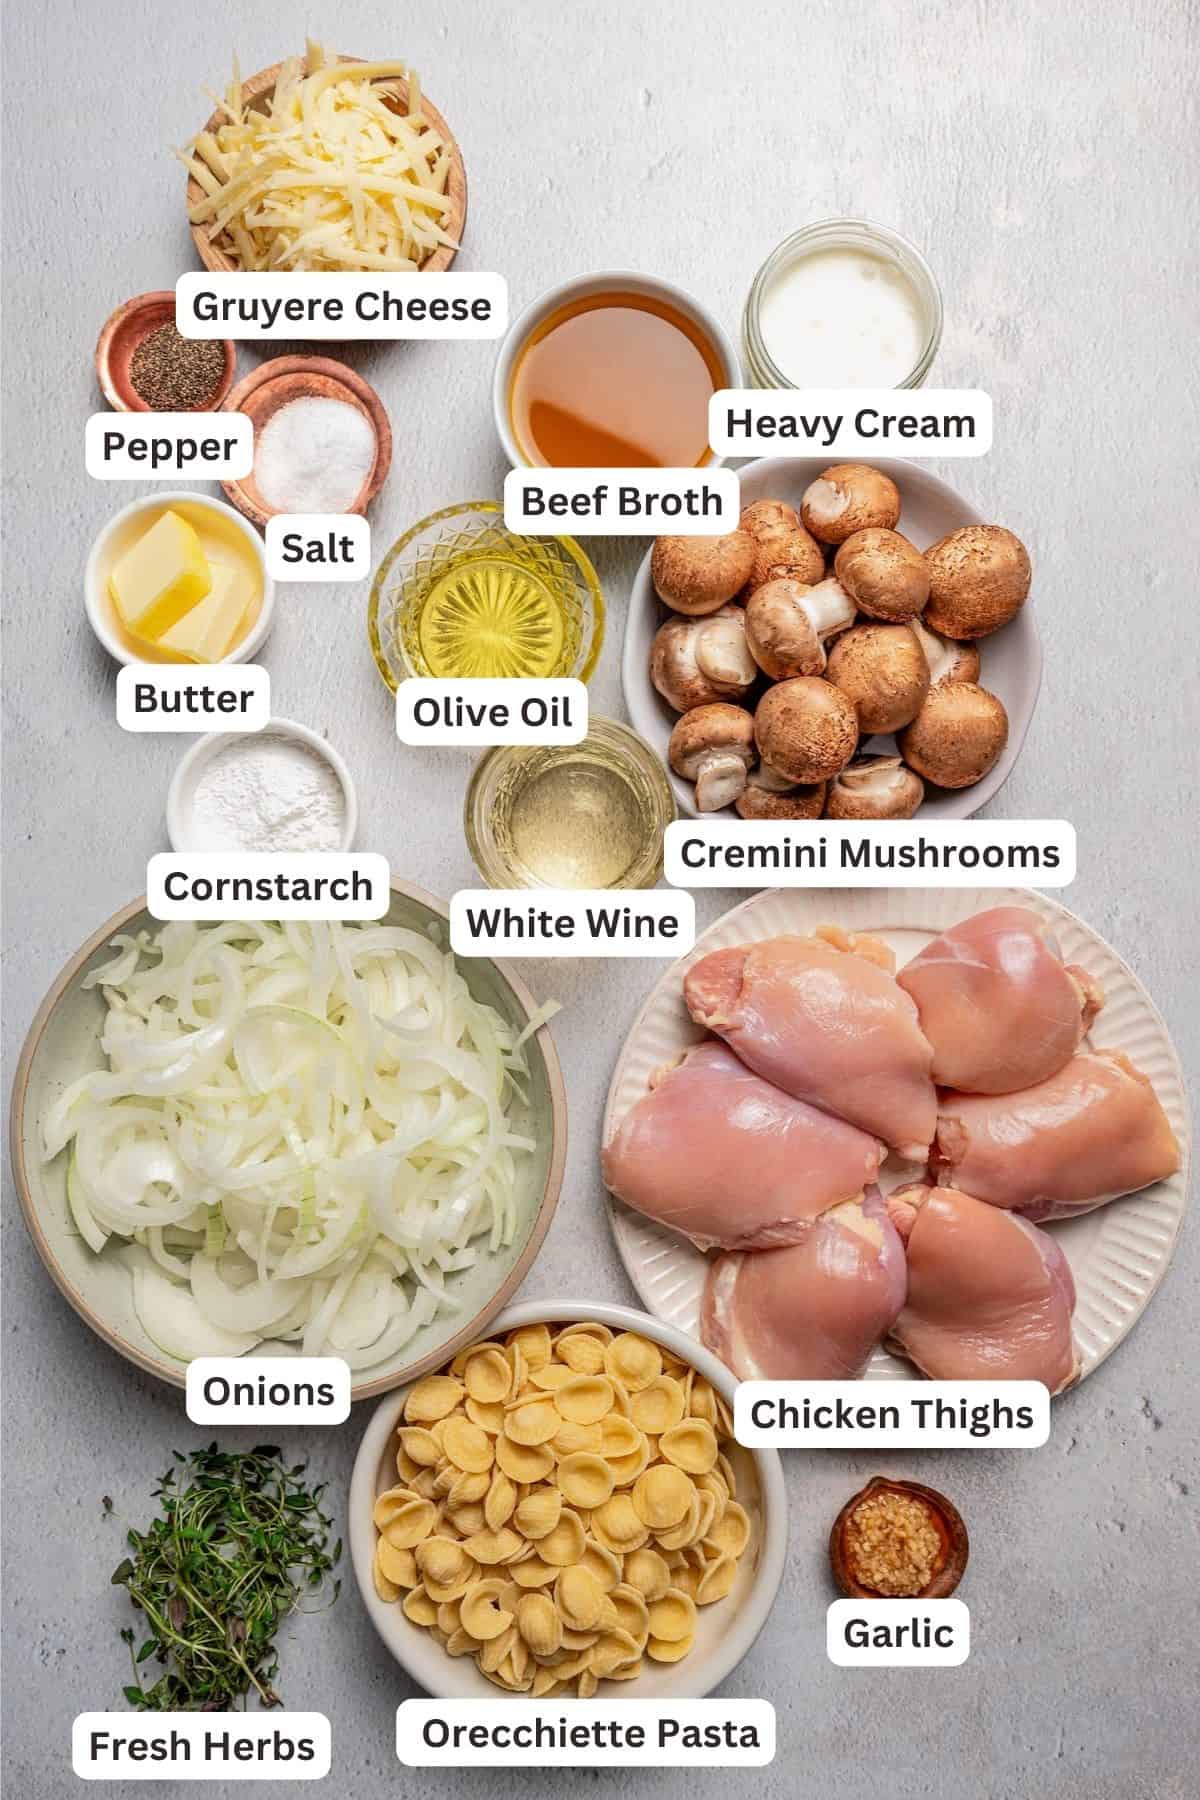 Ingredients for French Onion Pasta.